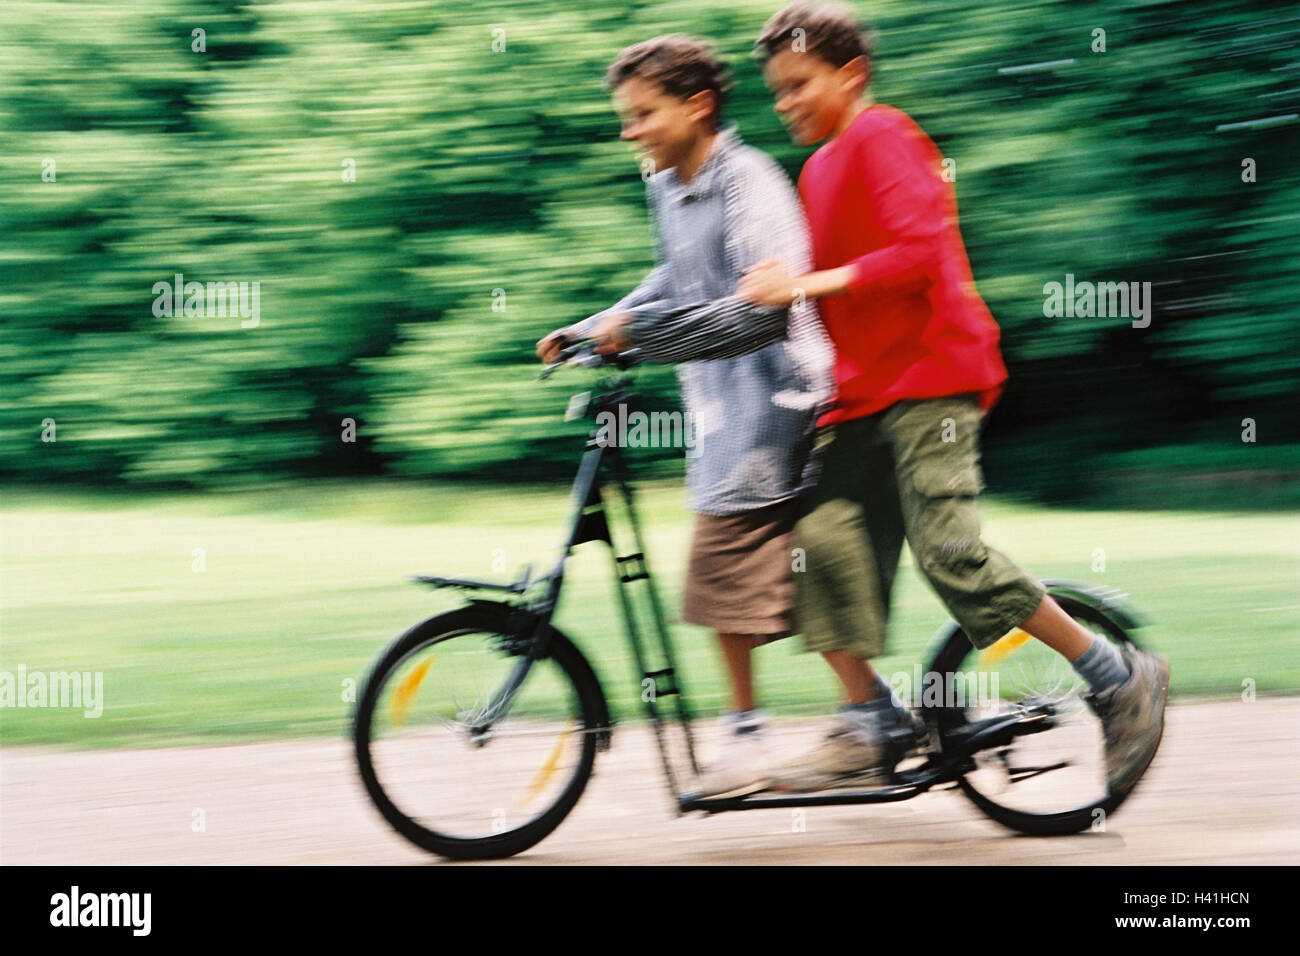 Boys, scooters, motion blur, youth, childhood, children, friends, two, game, fun, leisure time, scooter go, scooter driving, together, summer, outside, blur Stock Photo